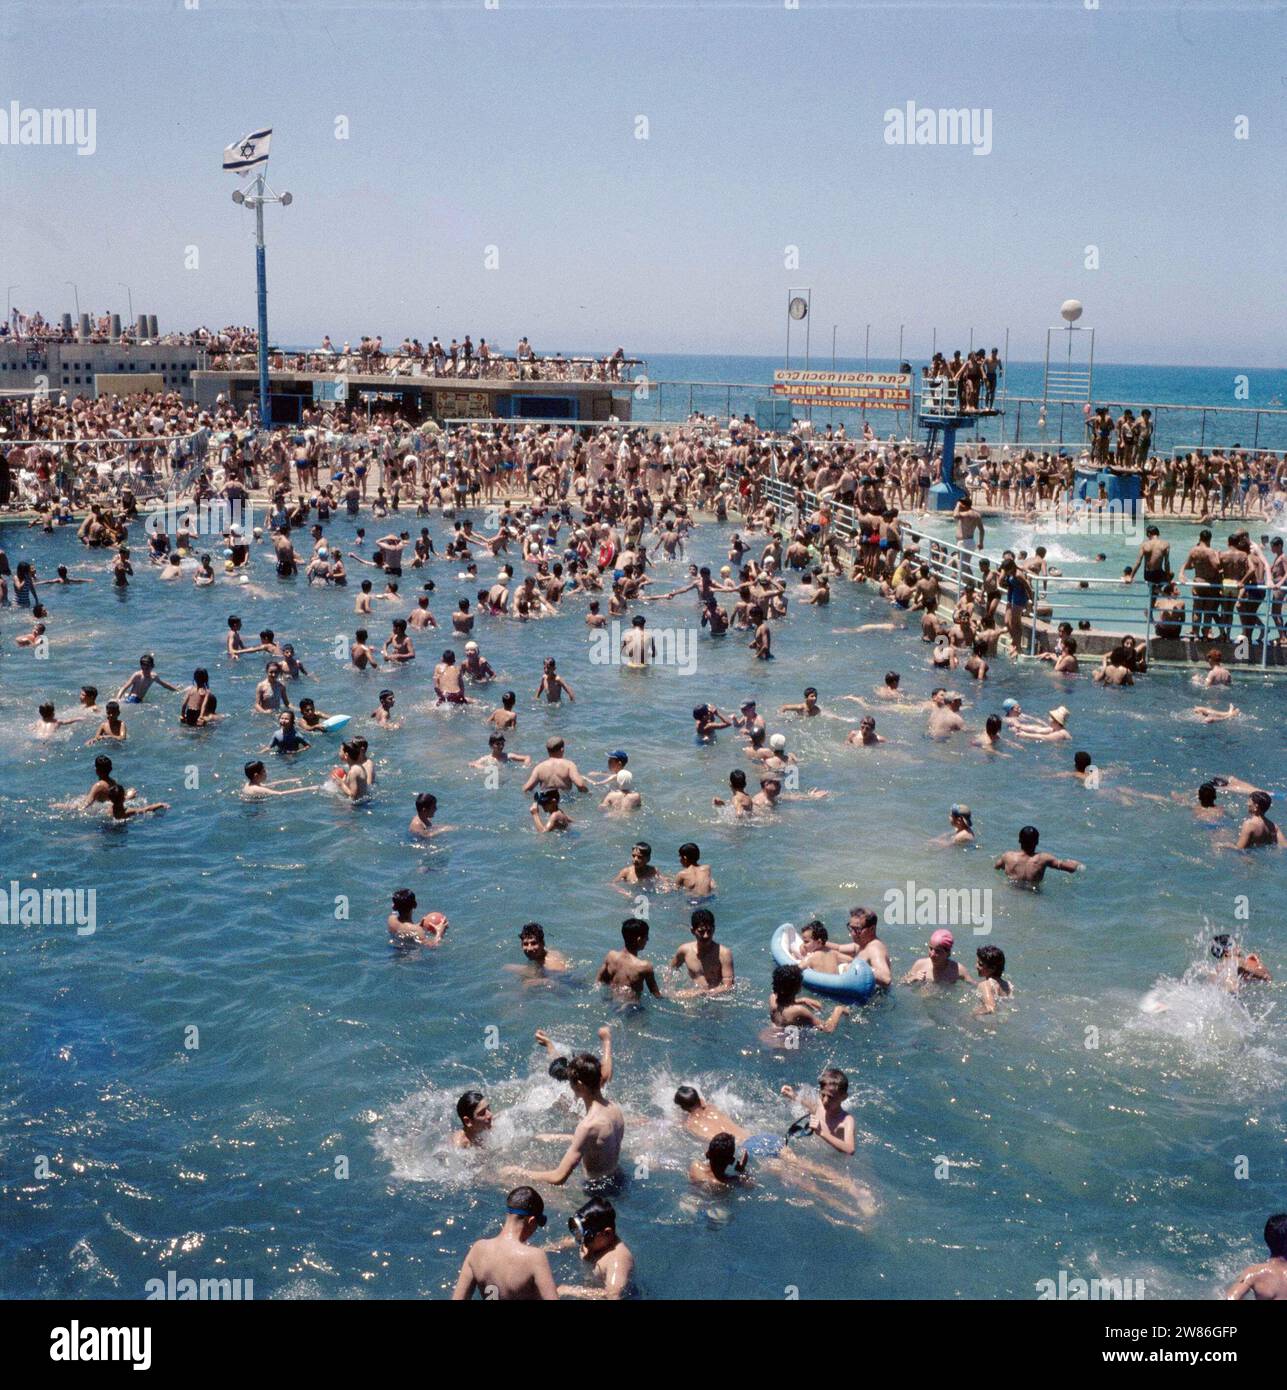 Tel Aviv. The overcrowded outdoor swimming pool on the boulevard overlooking the Mediterranean Sea ca. undated Stock Photo